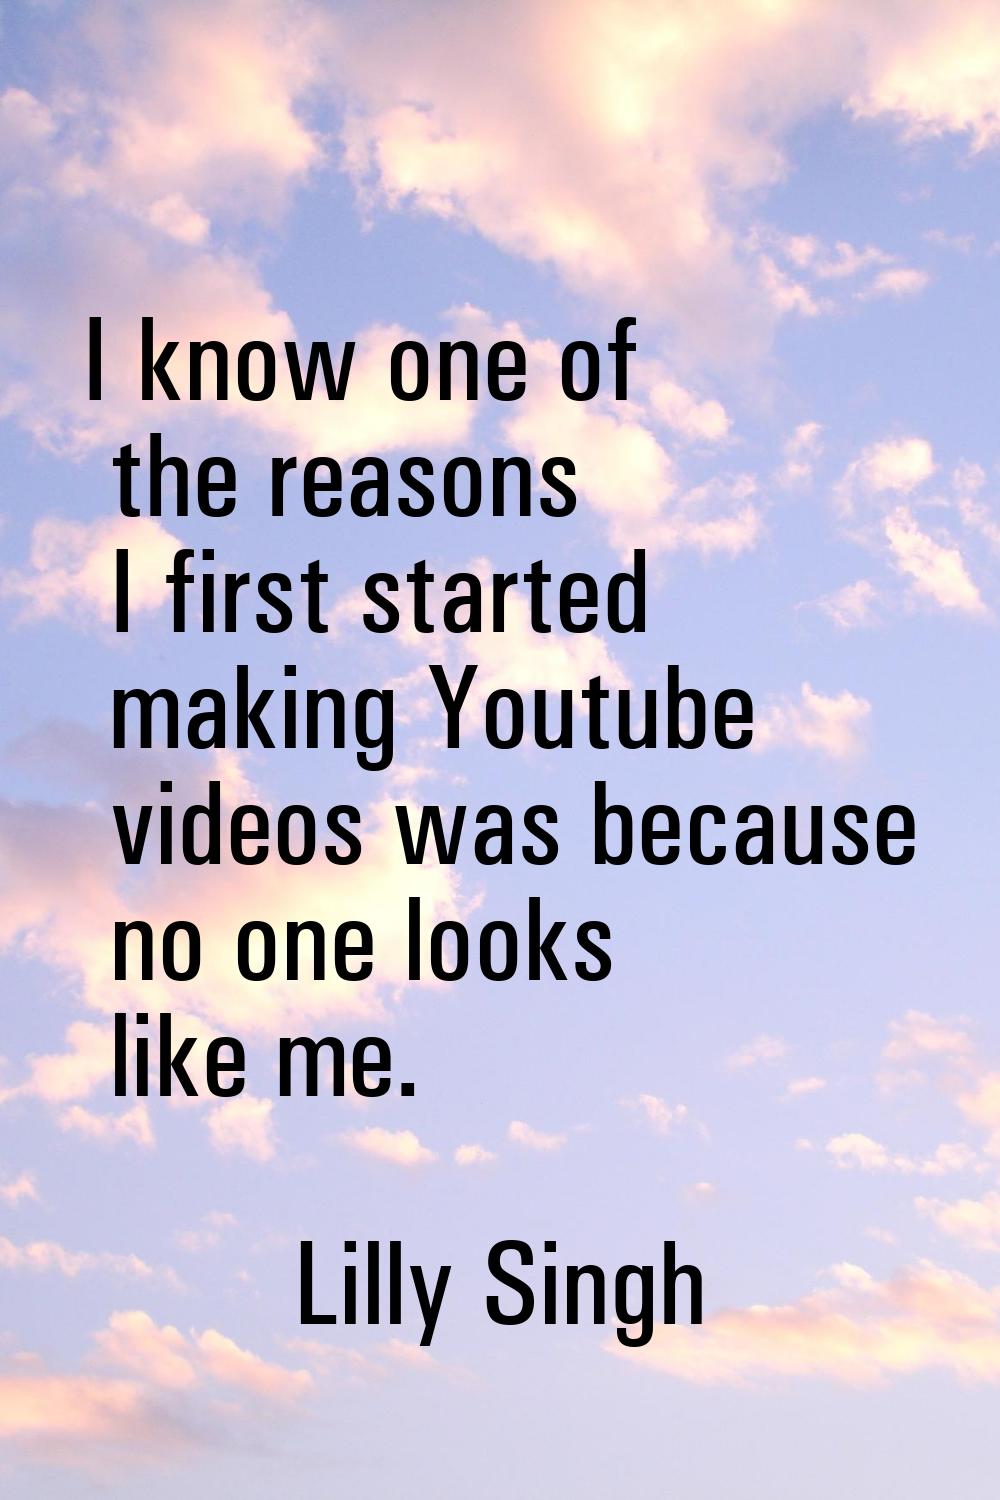 I know one of the reasons I first started making Youtube videos was because no one looks like me.